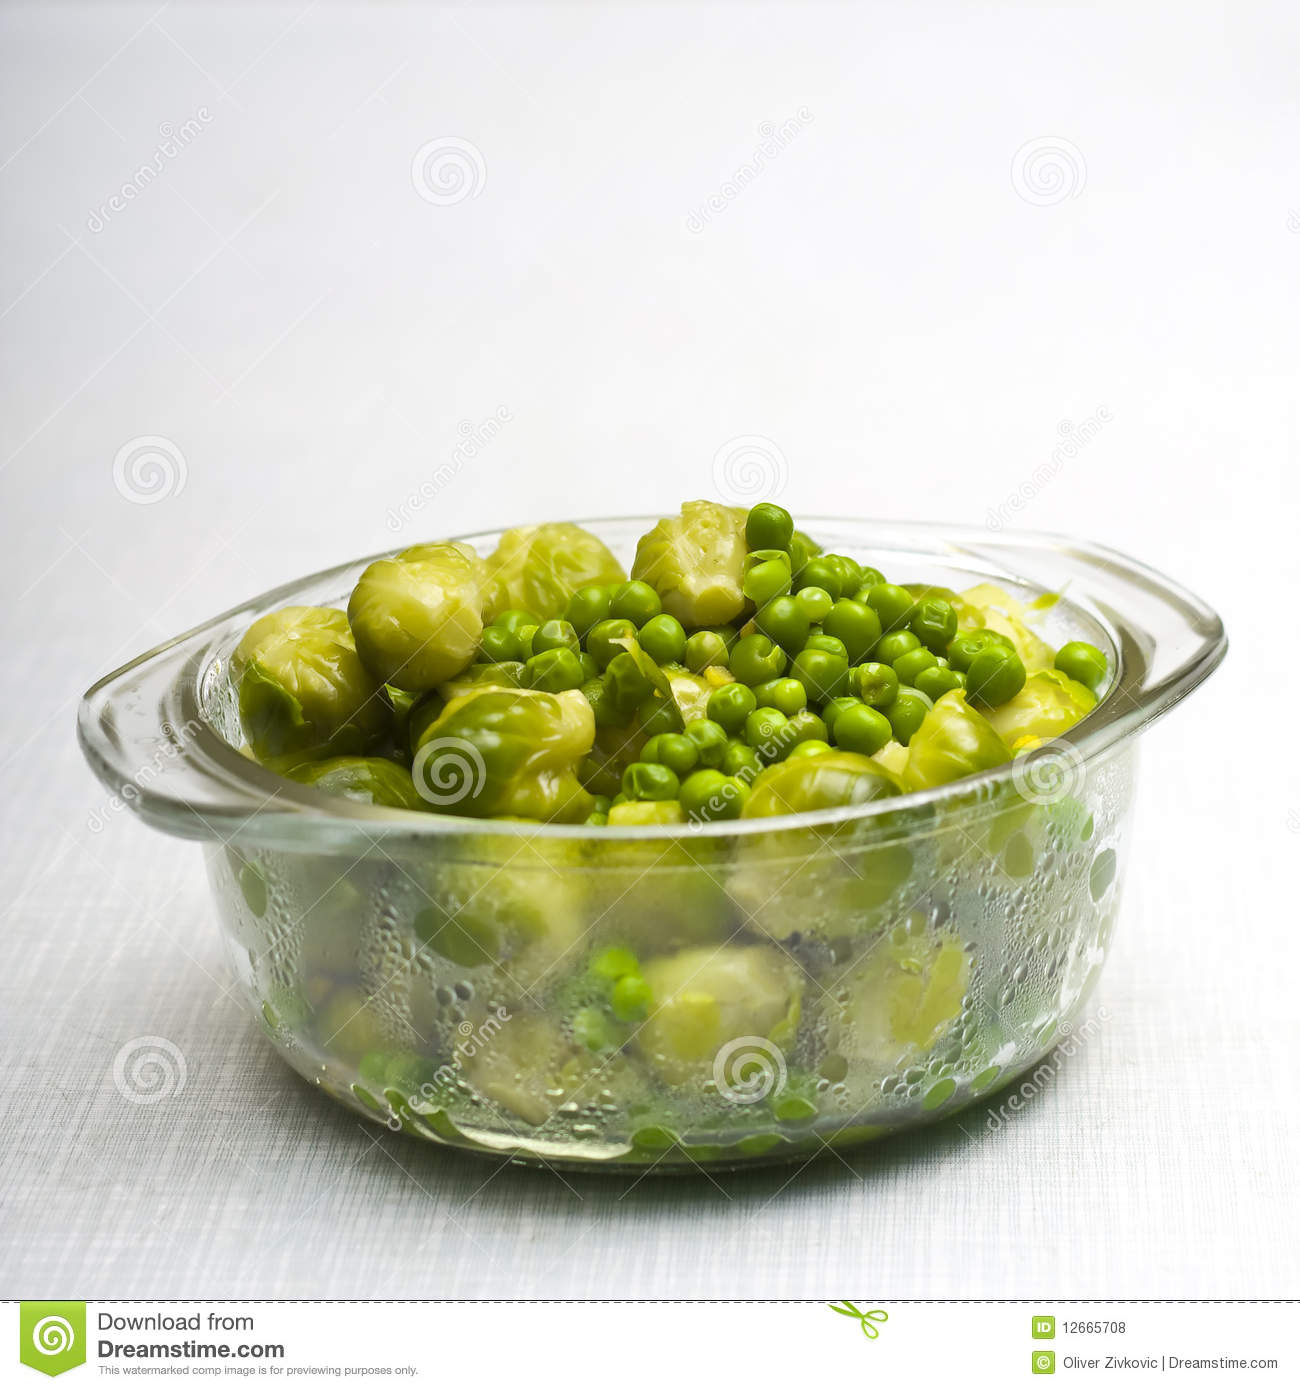 Bowl Of Freshly Steamed Peas And Vegetables Royalty Free Stock Photos